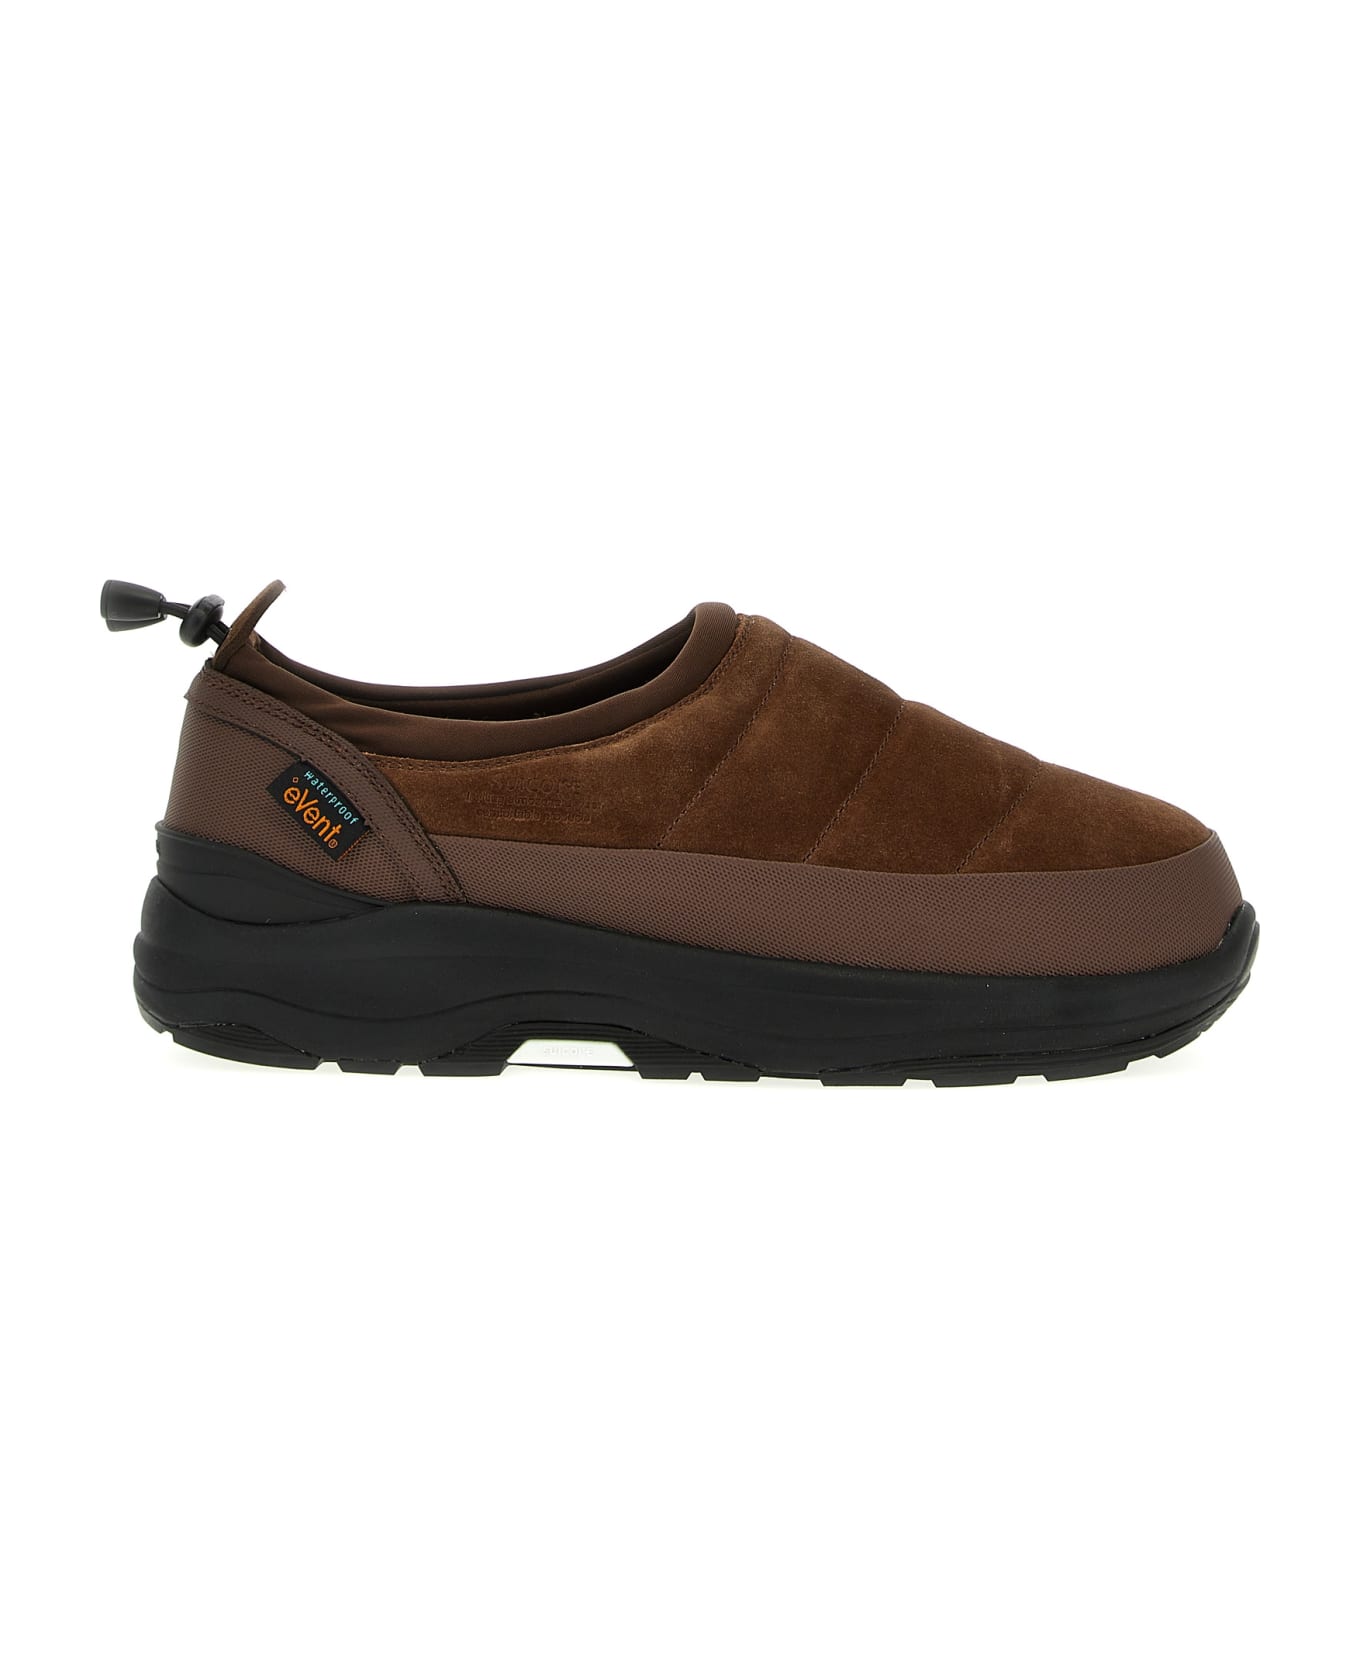 SUICOKE 'pepper' Shoes - Brown その他各種シューズ